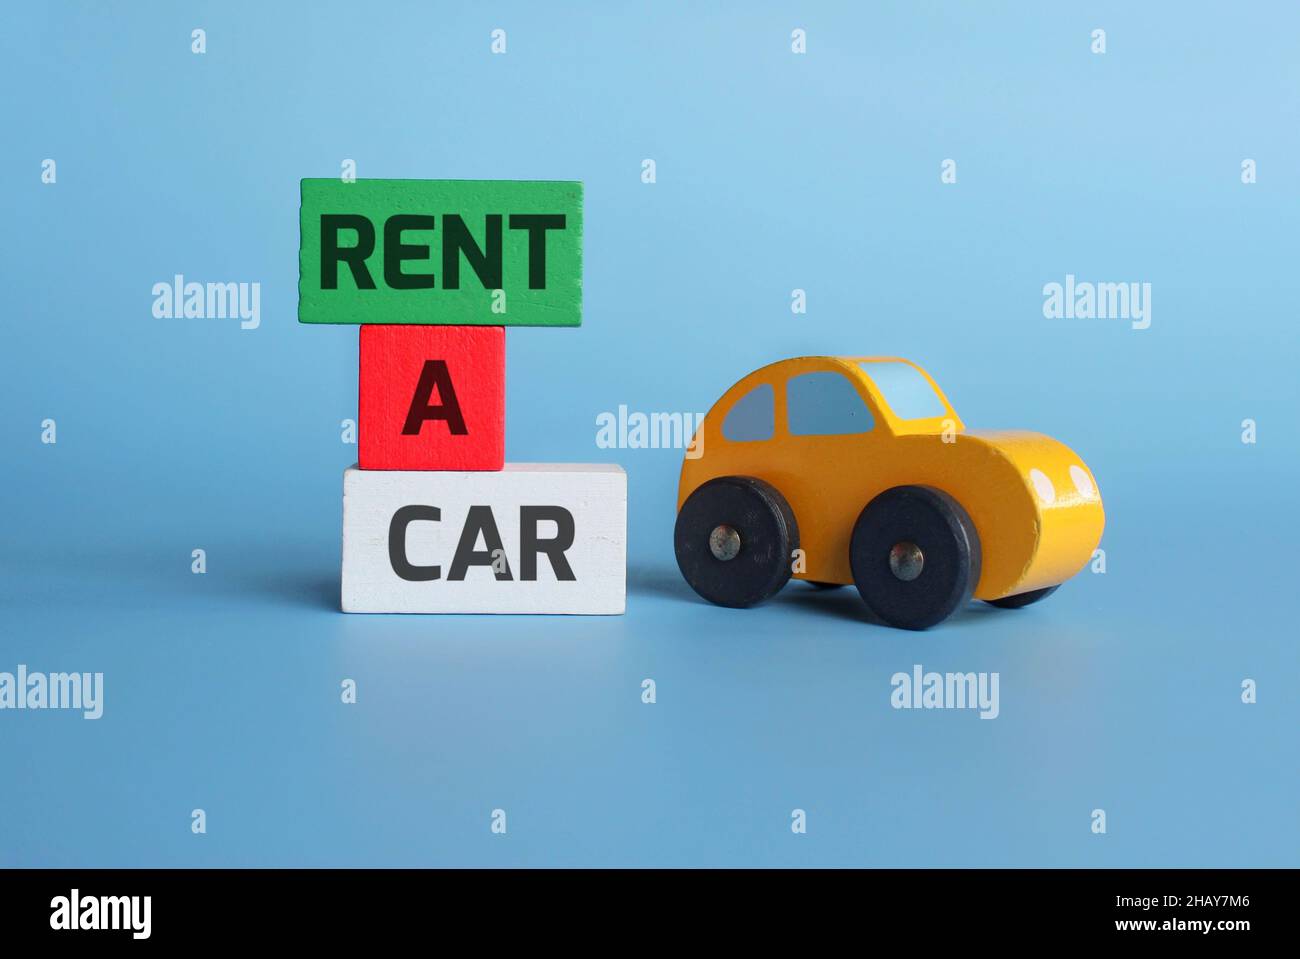 Business and finance concept. Wooden toy car and wooden cubes with text RENT A CAR Stock Photo